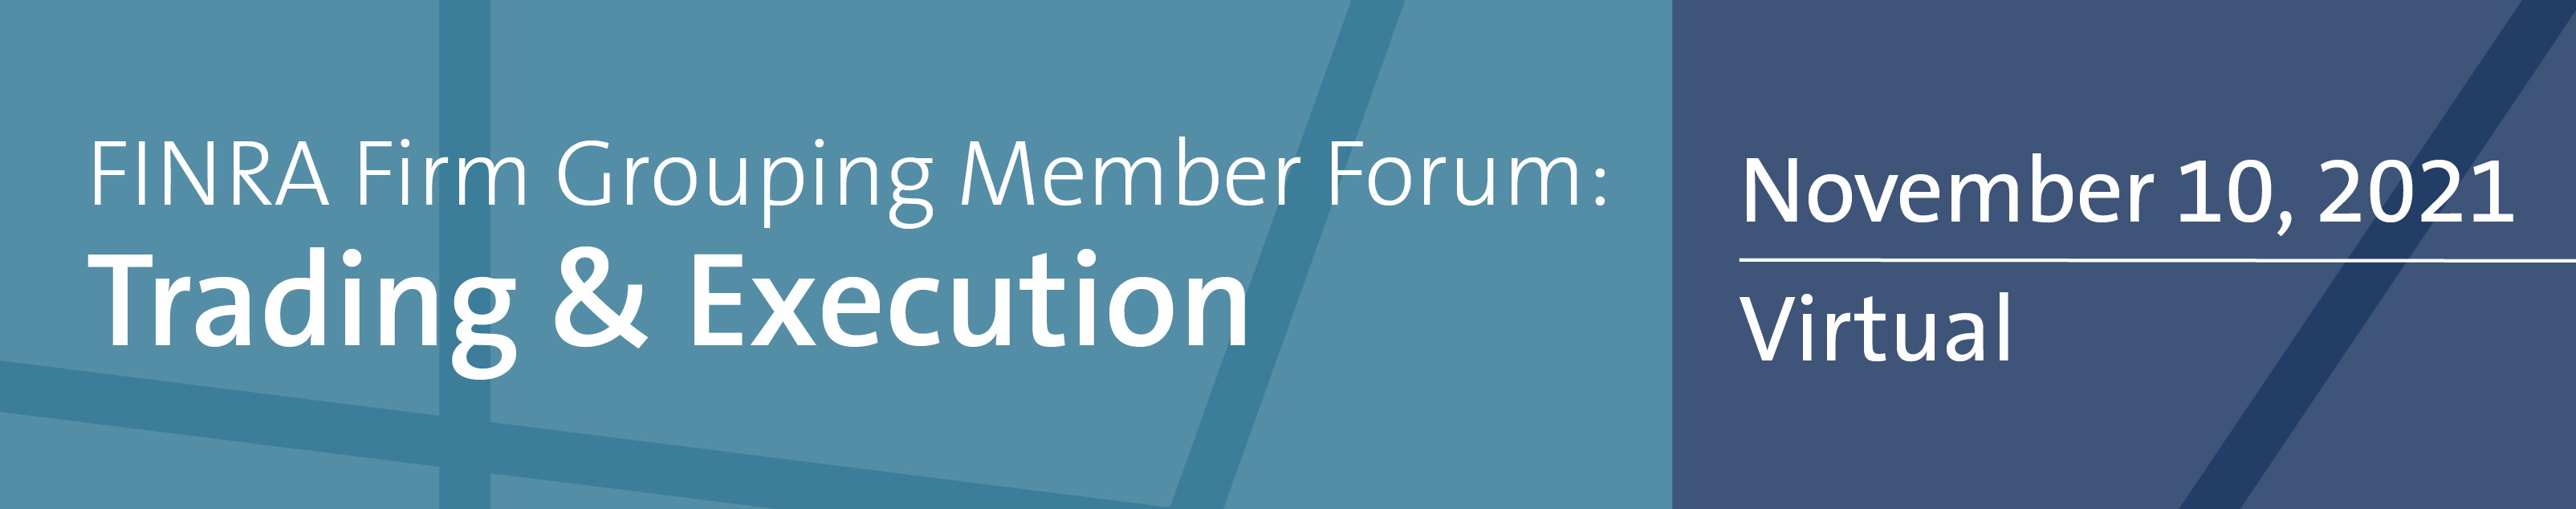 Event banner: FINRA Firm Grouping Member Forum: Trading and Execution